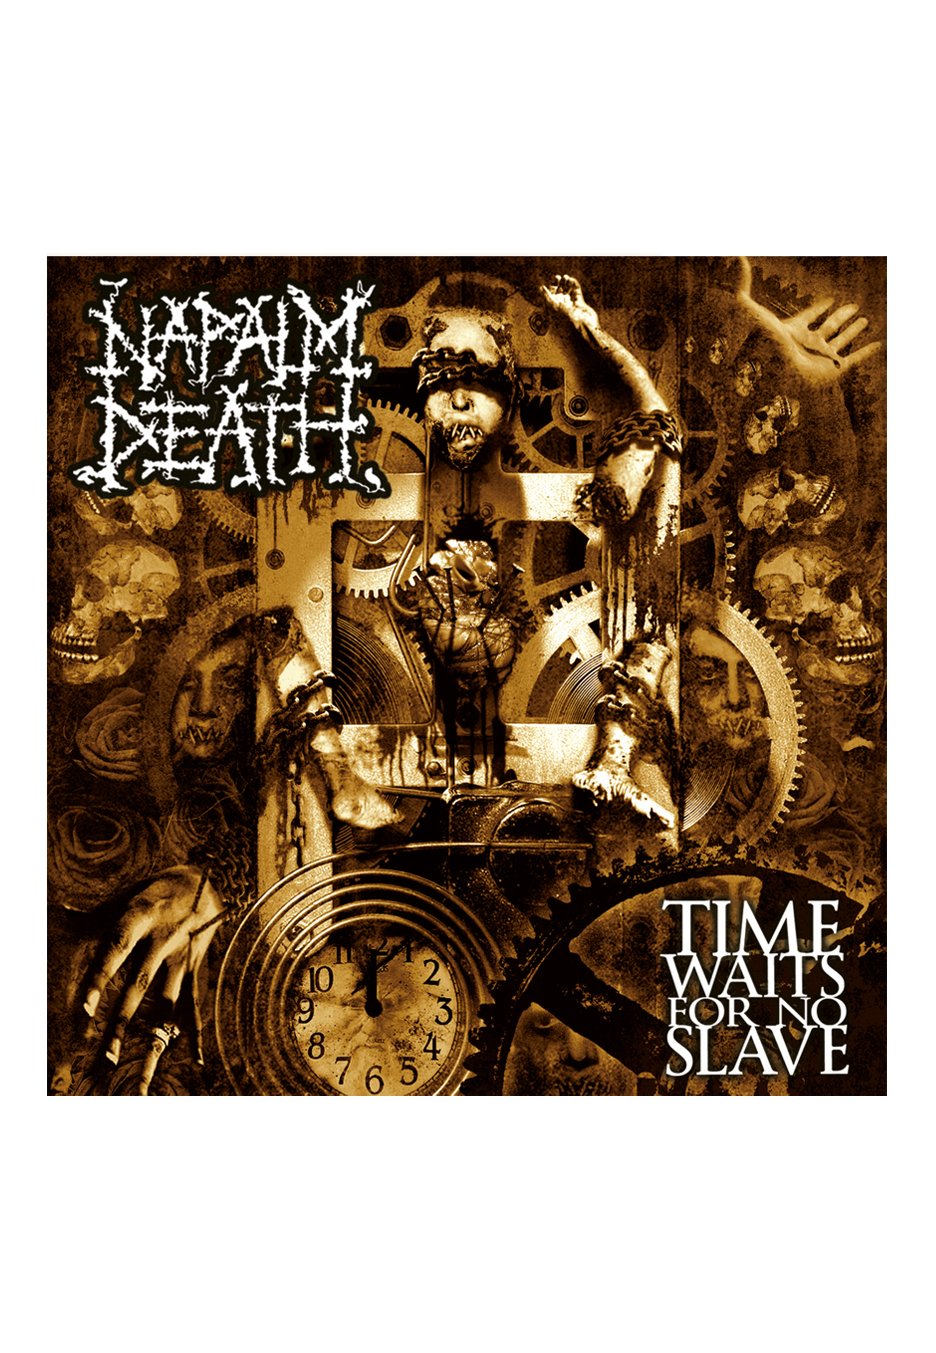 Napalm Death - Time Waits For No Slave - CD